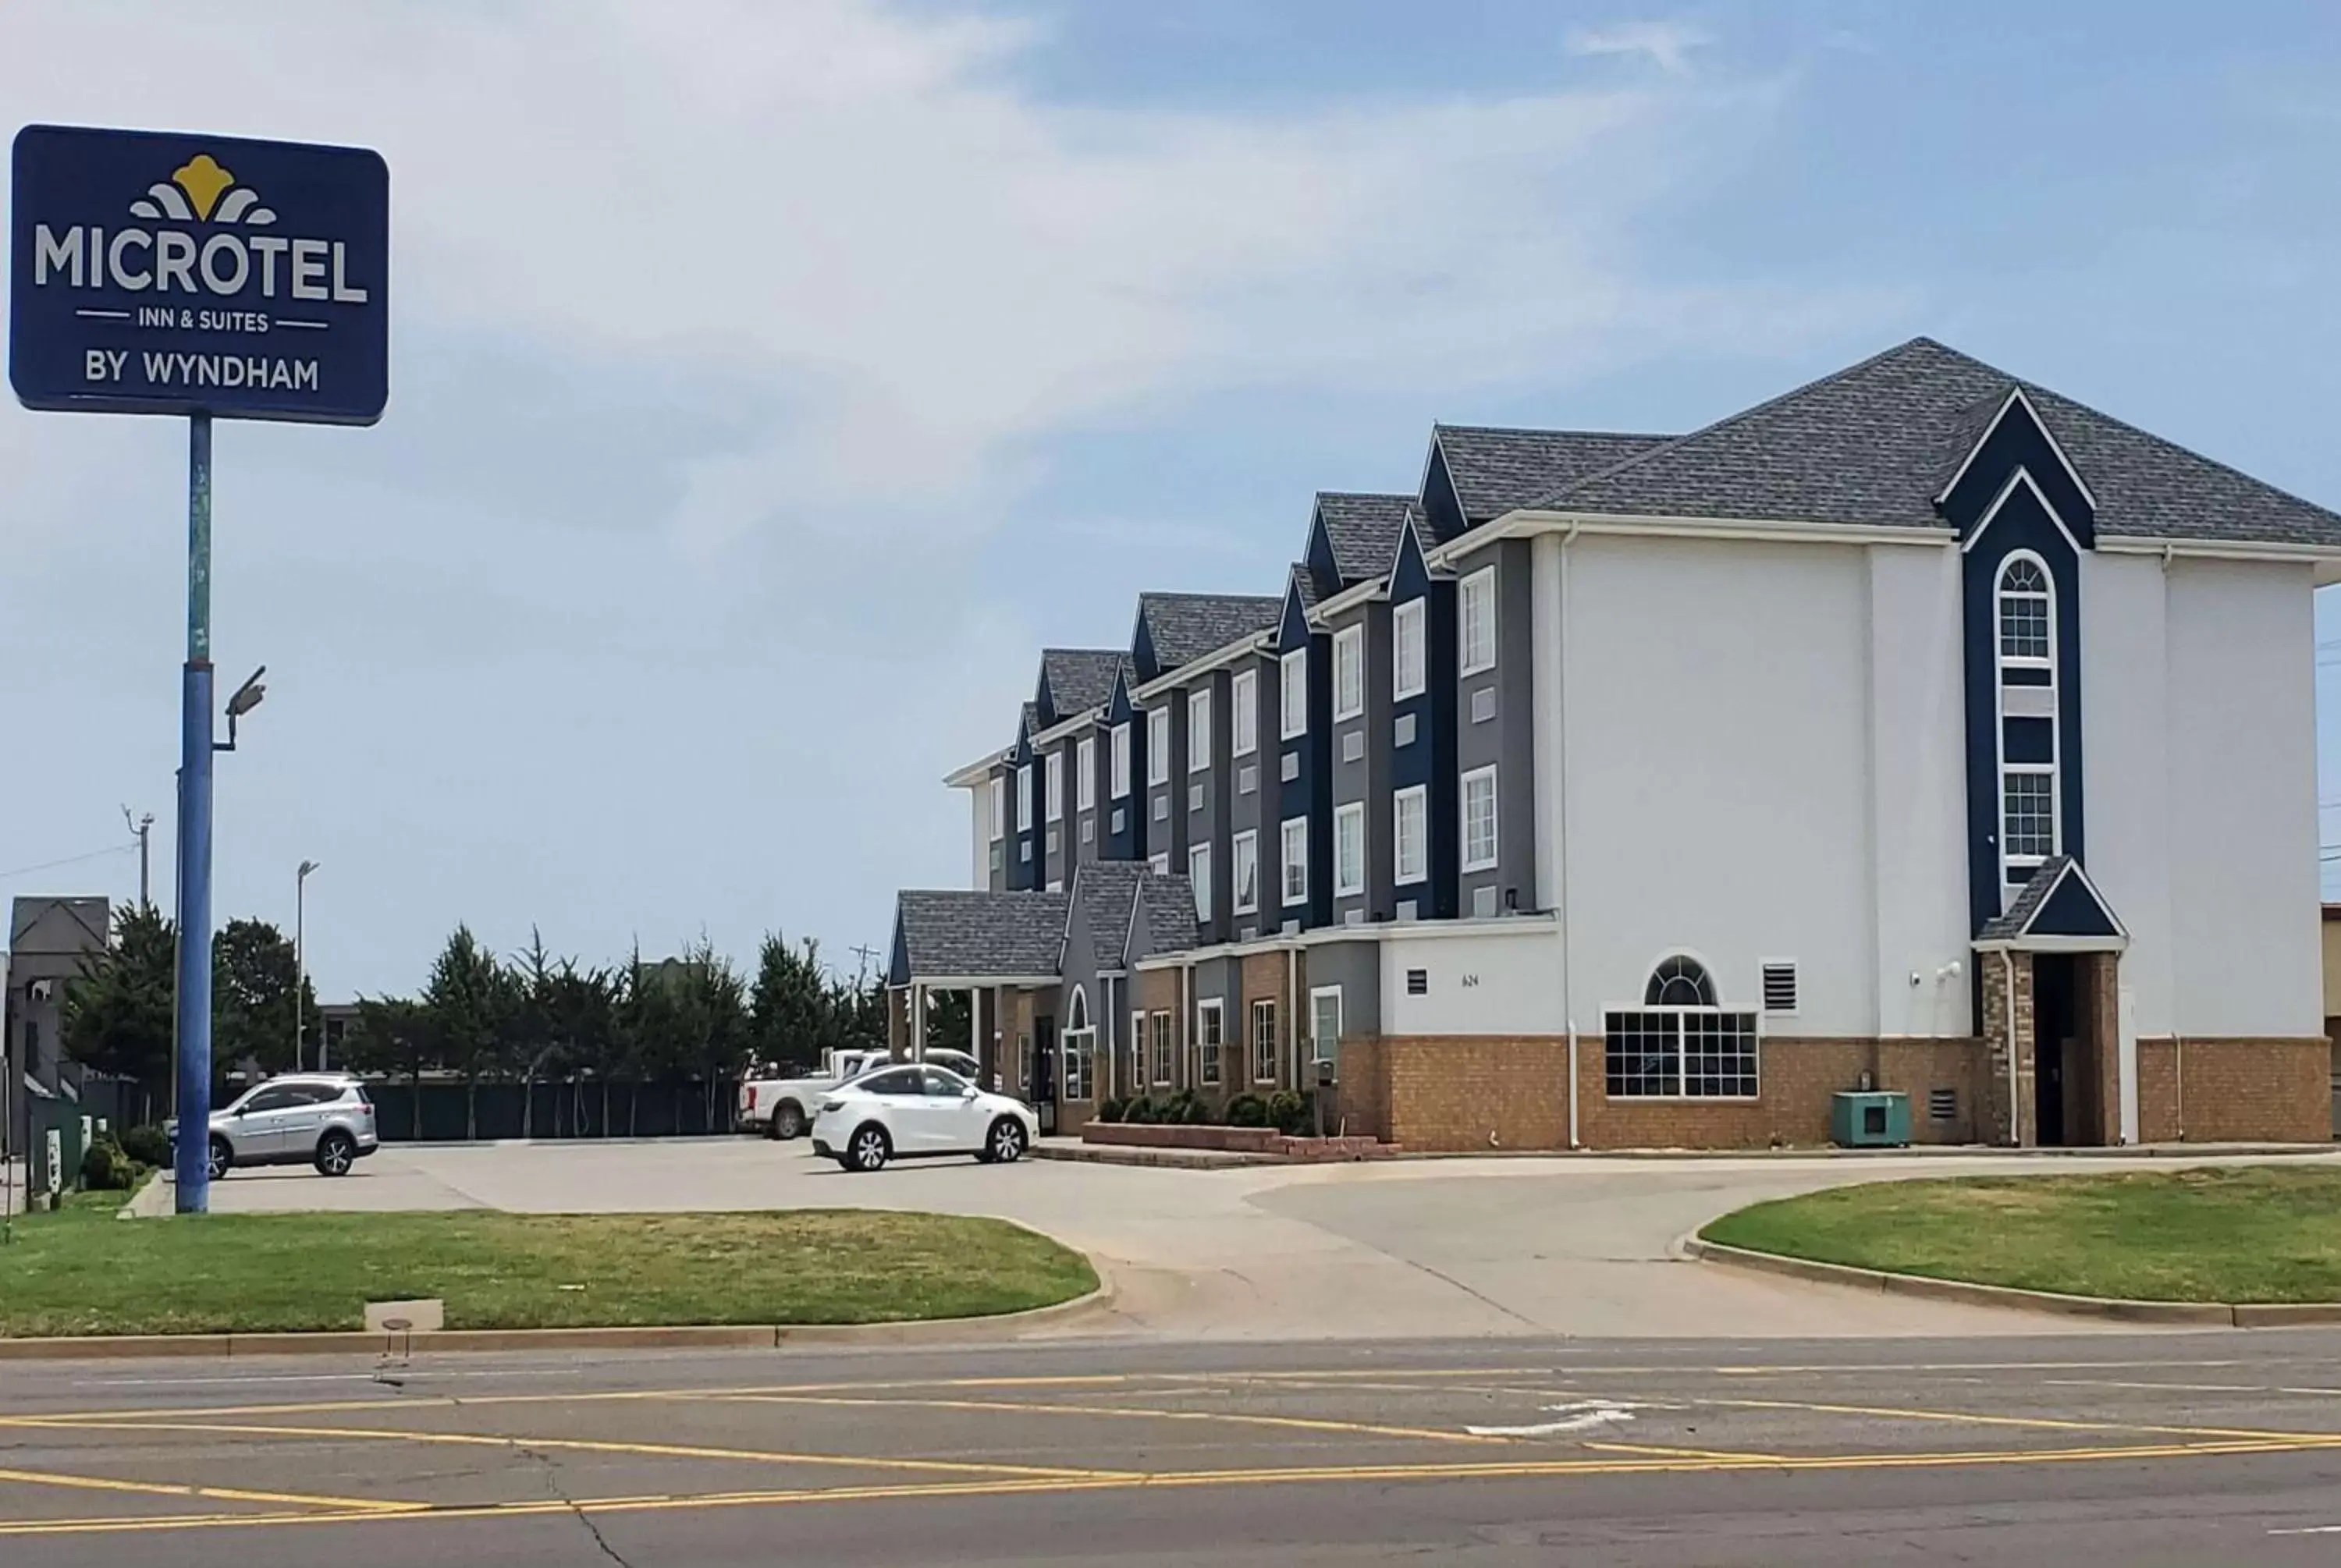 Property Building in Microtel Inn & Suites by Wyndham Oklahoma City Airport